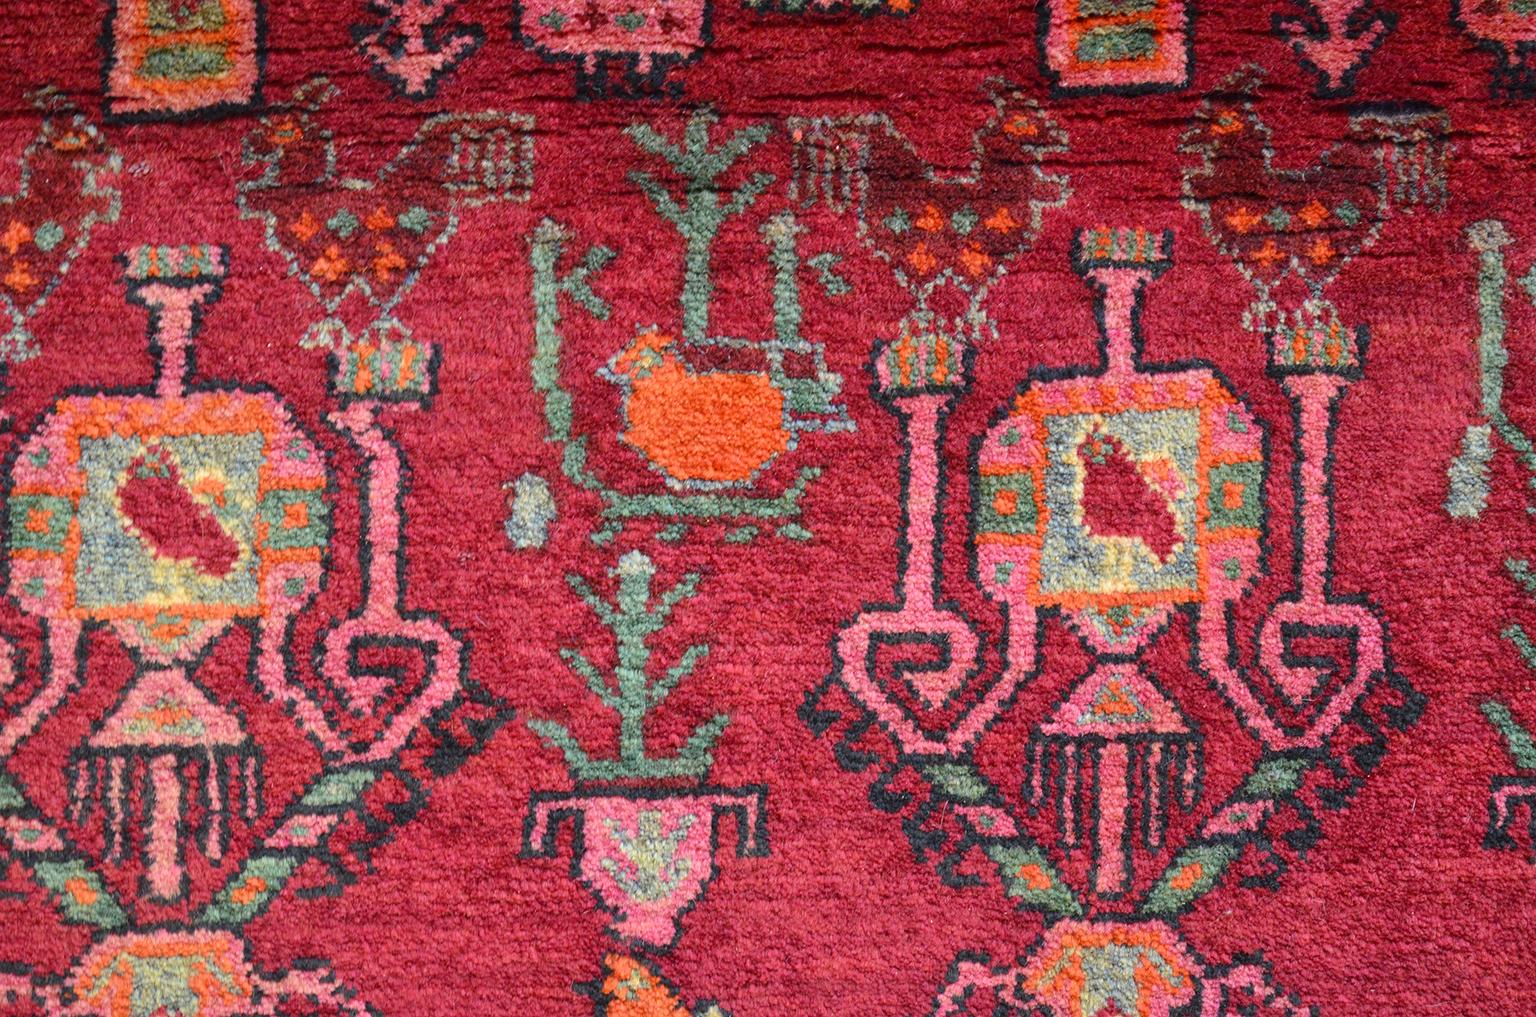 Mid-20th Century Vintage 1940s Wool Persian Belouchi Rug, Peacock Design, 5' x 9' For Sale